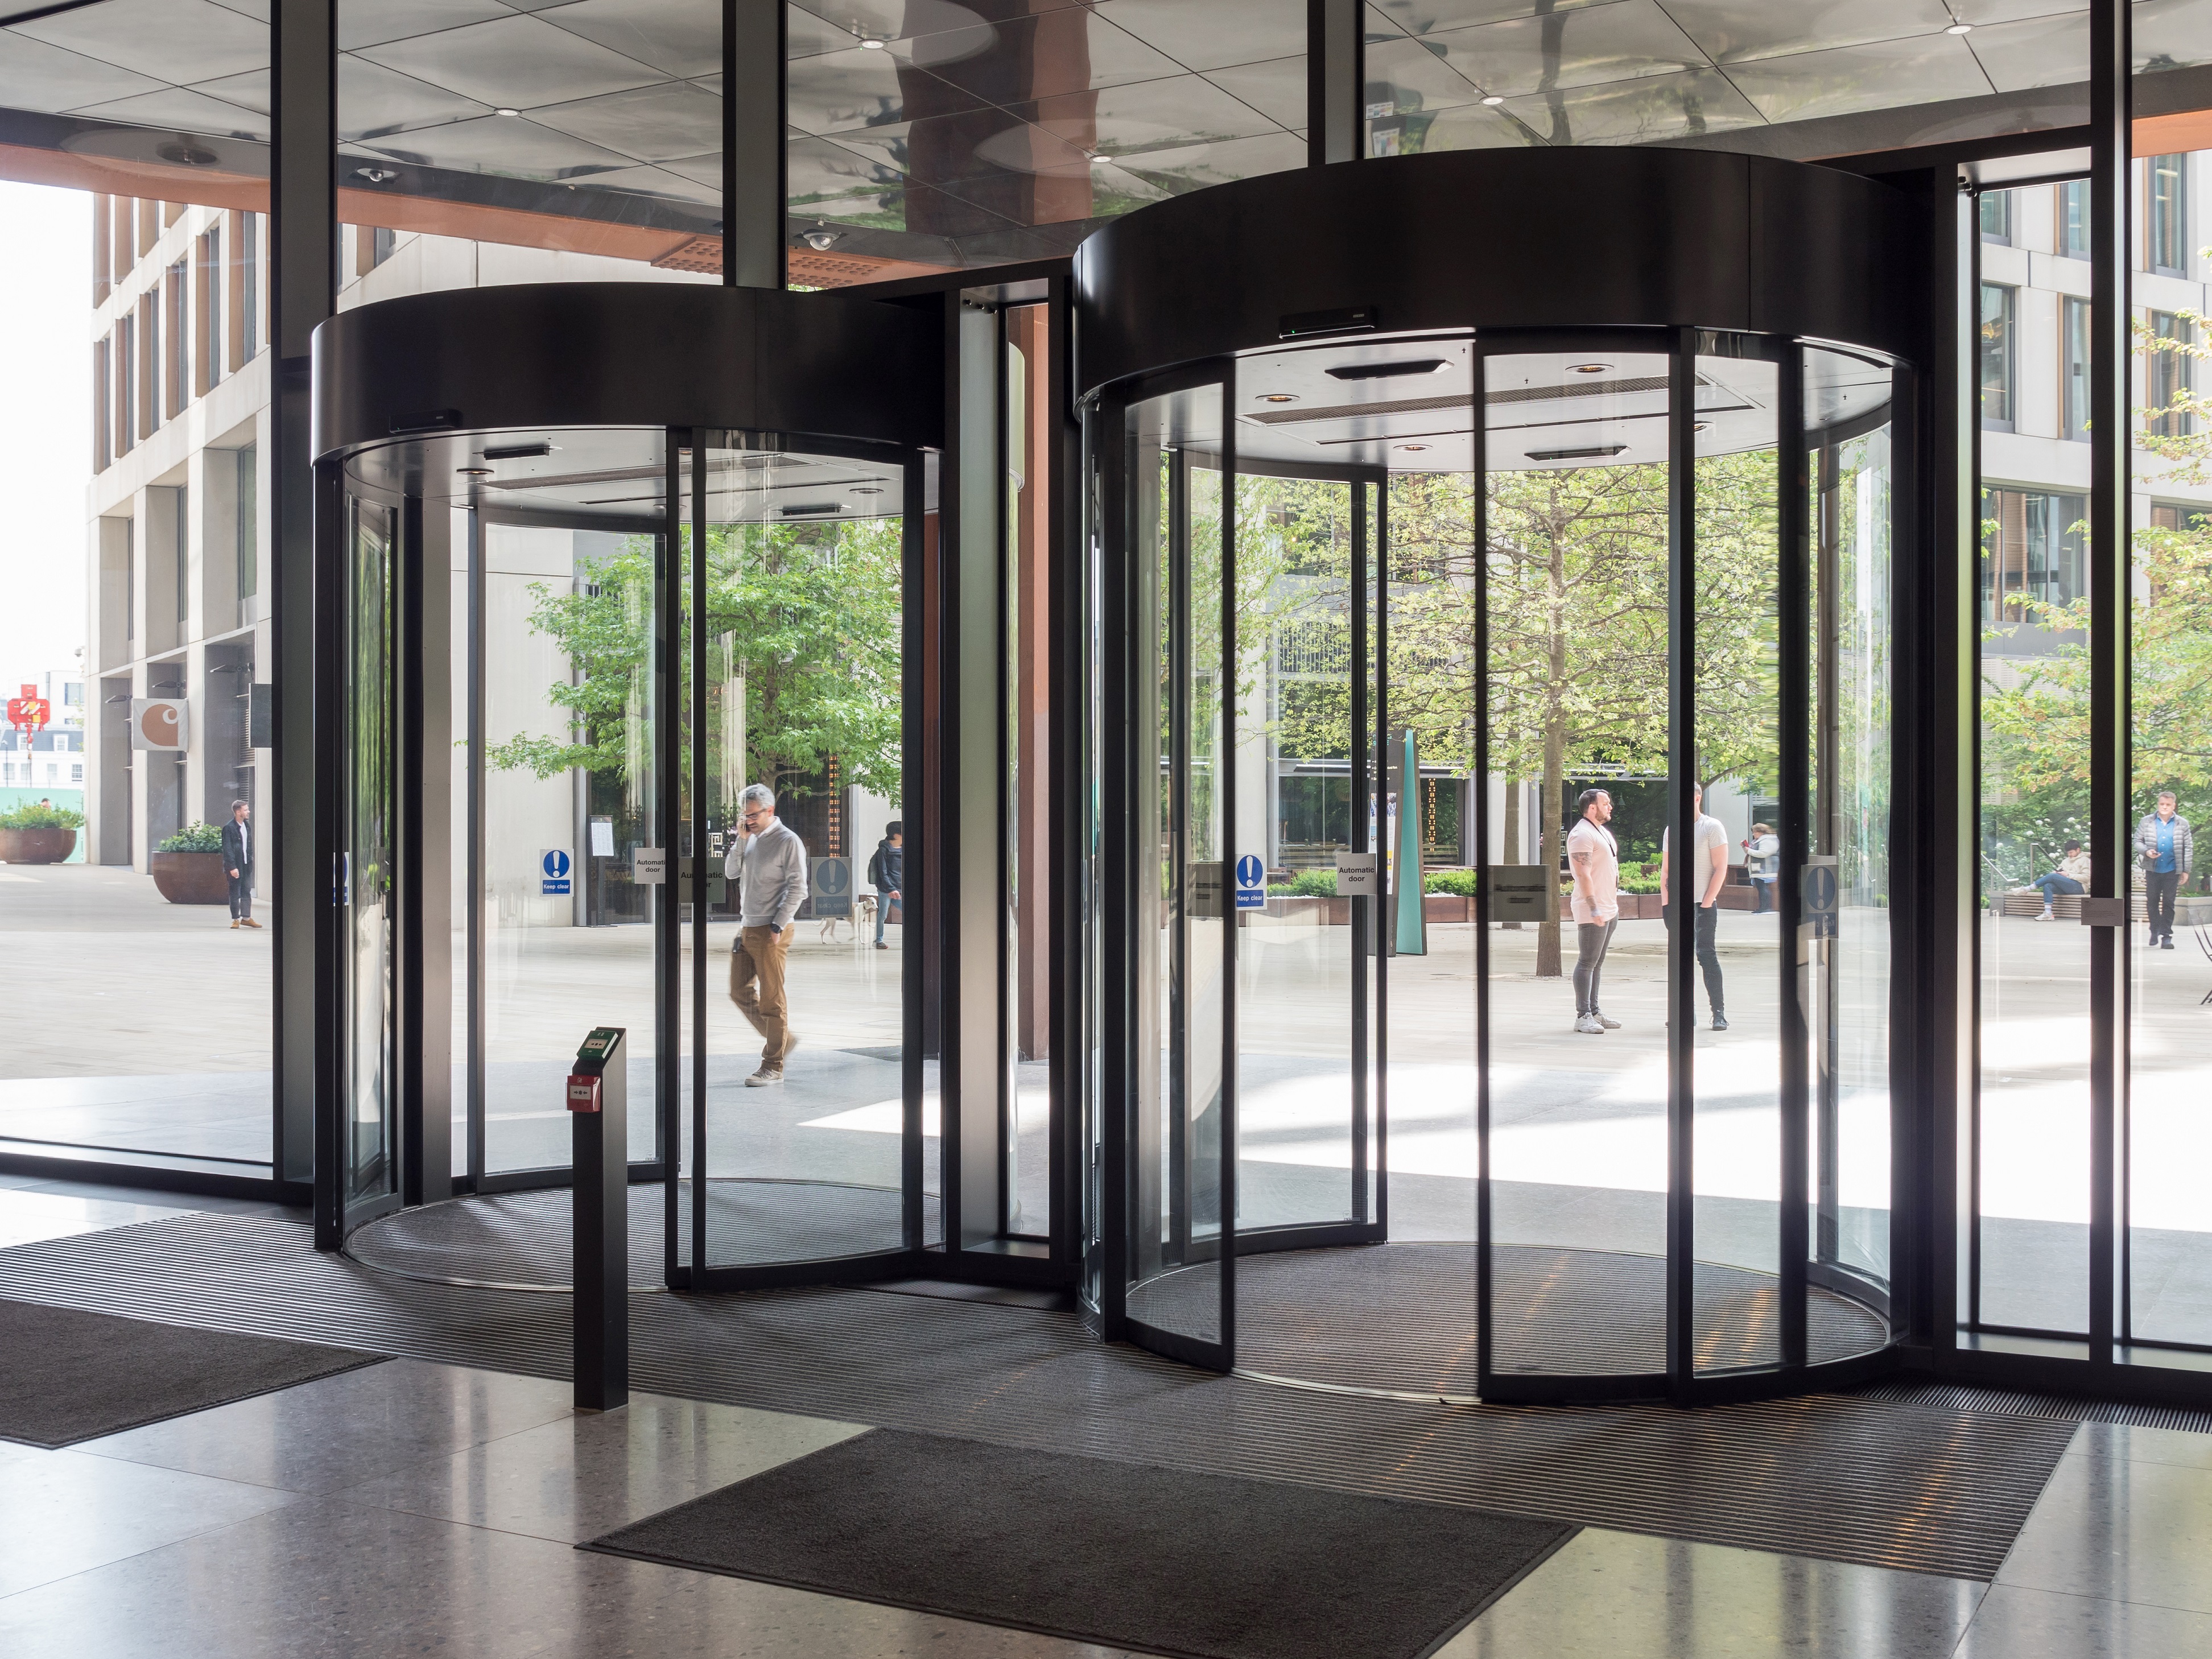 GEZE’s automatic doors have hit just the right note in the development of a London building which is the new home of Universal Music. @GEZE_UK